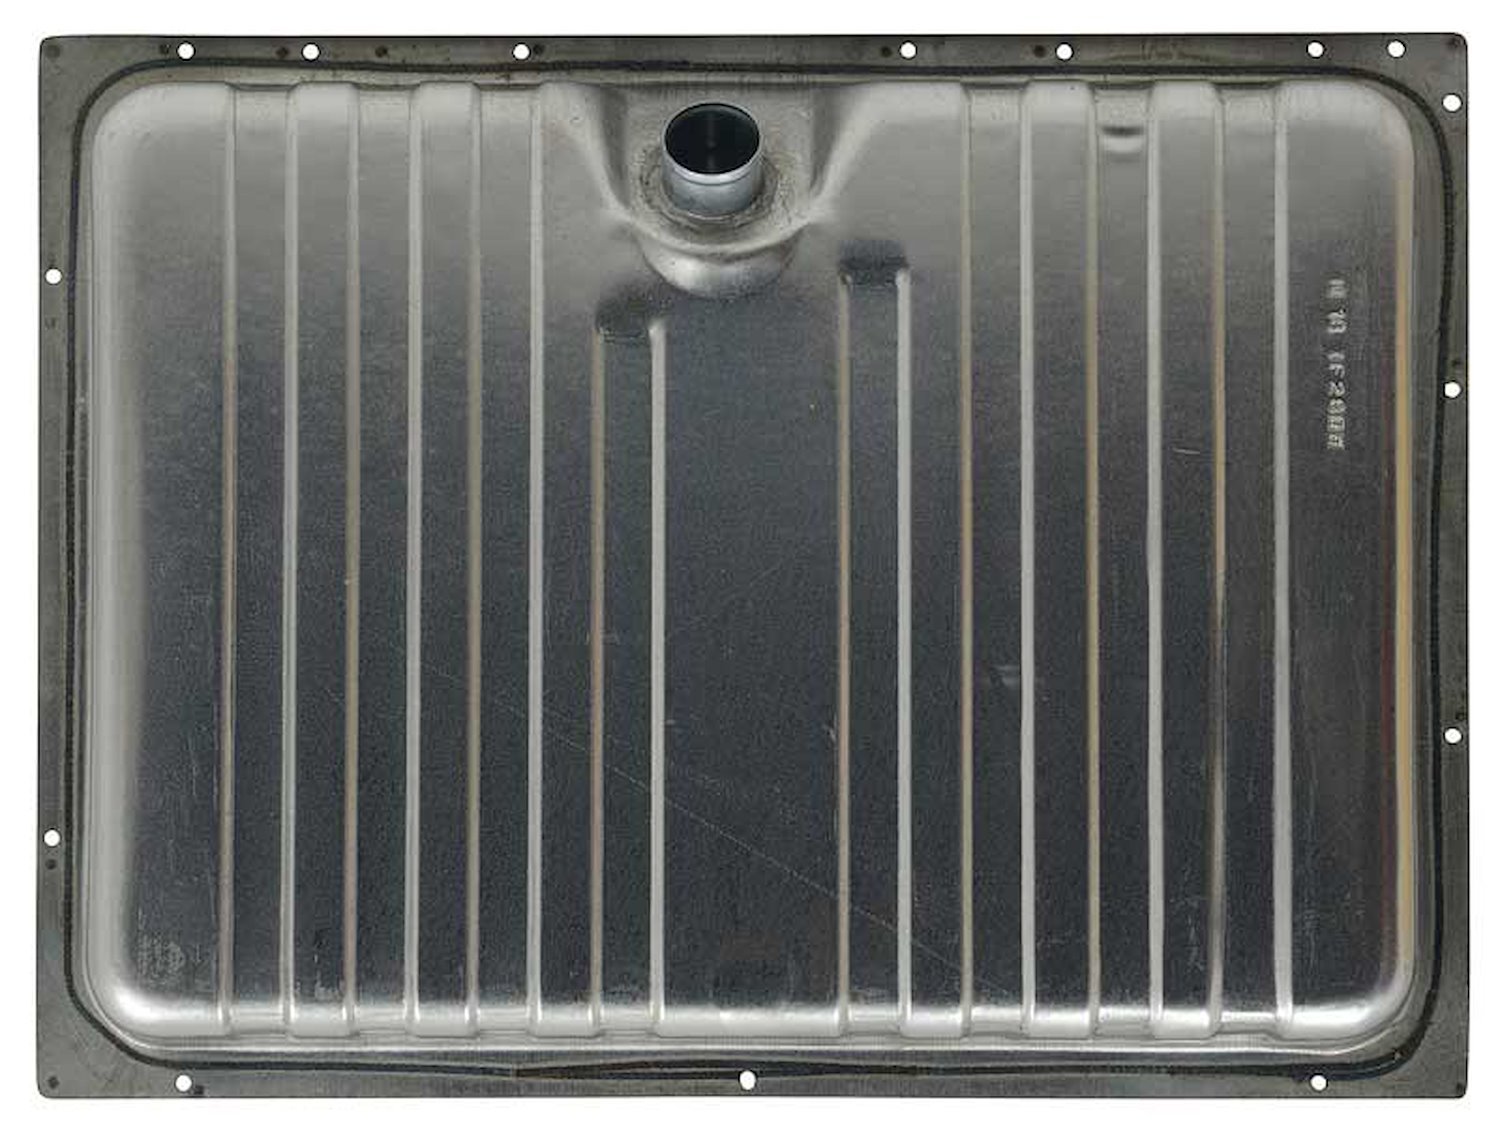 FT8005C Fuel Tank 1970 Ford Mustang, Mercury Cougar; with Drain Plug; Stainless Steel; F28D; 22 Gallon Capacity